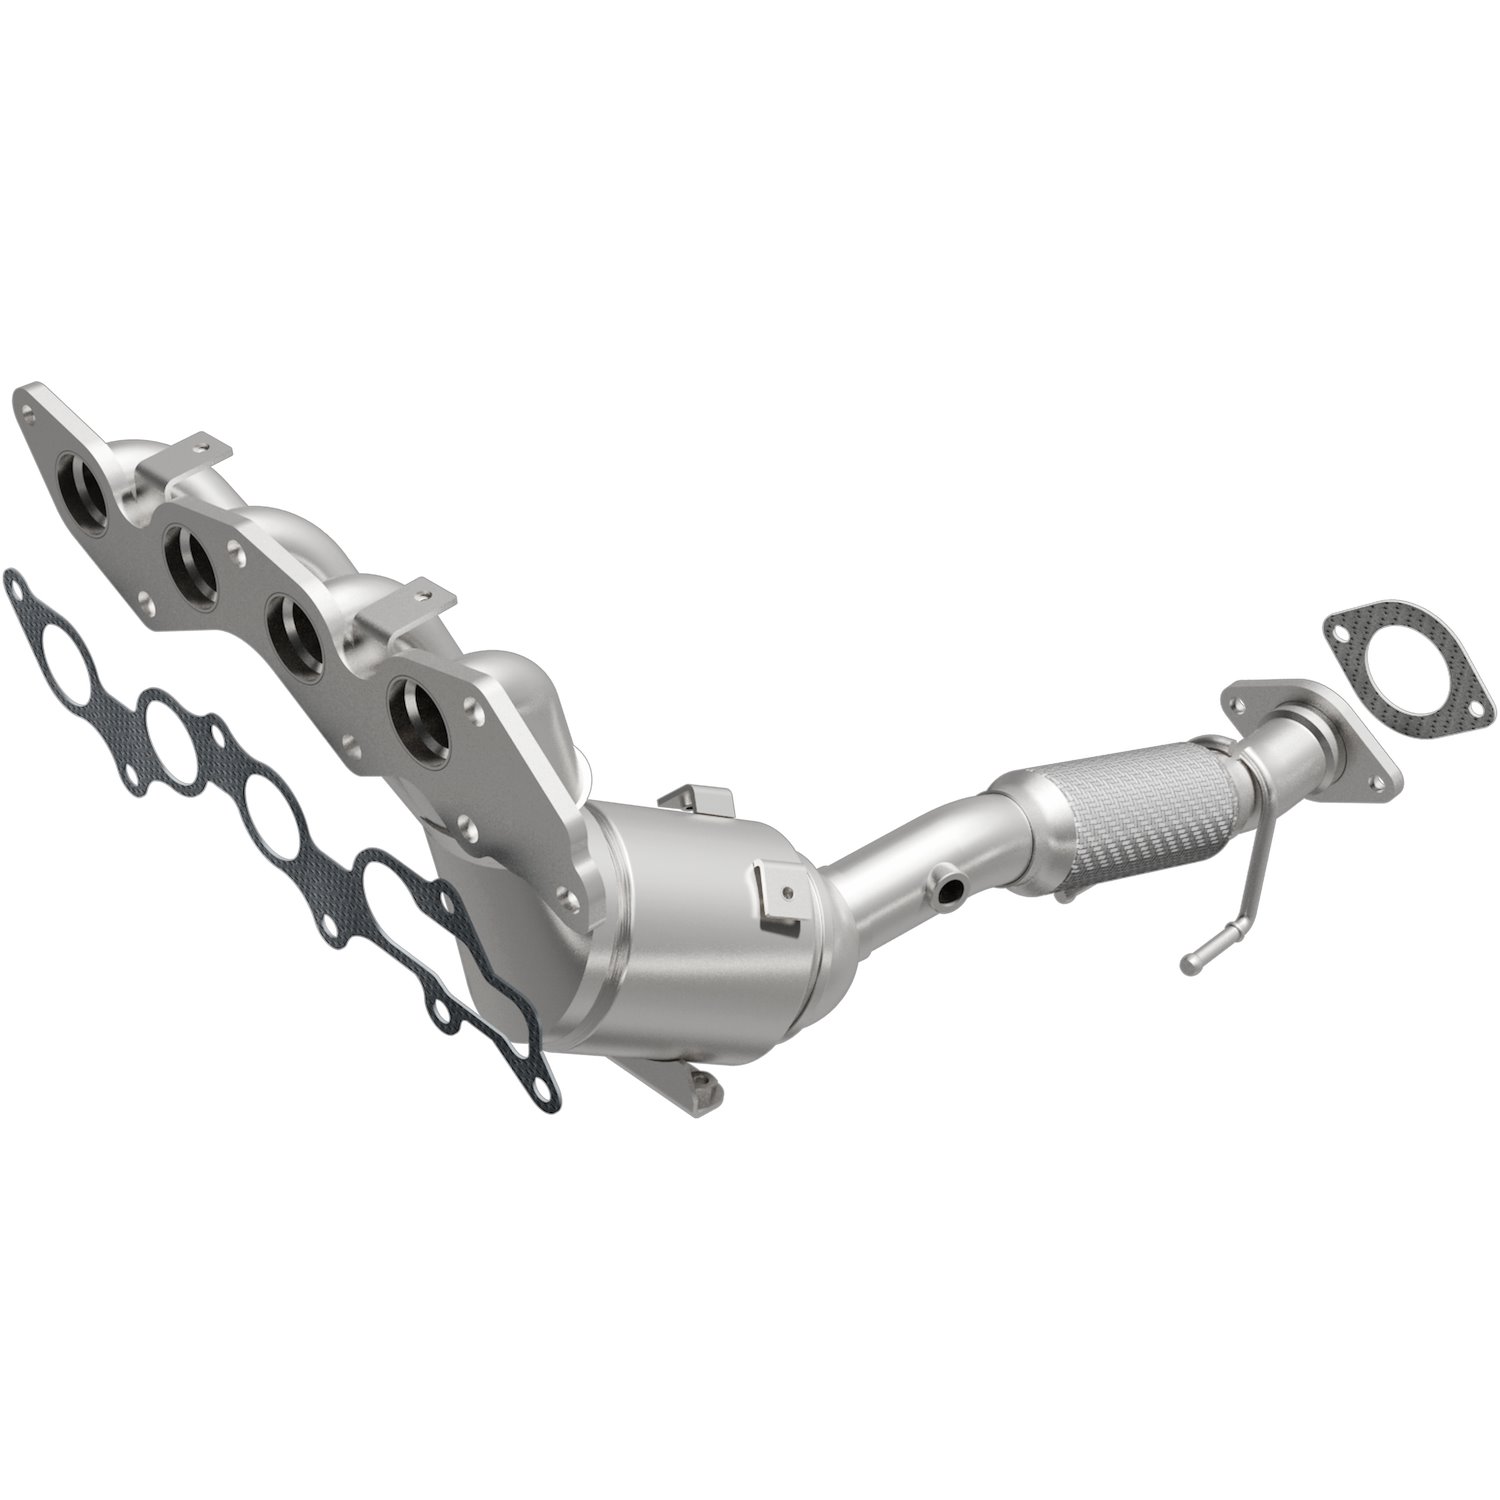 2014-2015 Ford Transit Connect OEM Grade Federal / EPA Compliant Manifold Catalytic Converter